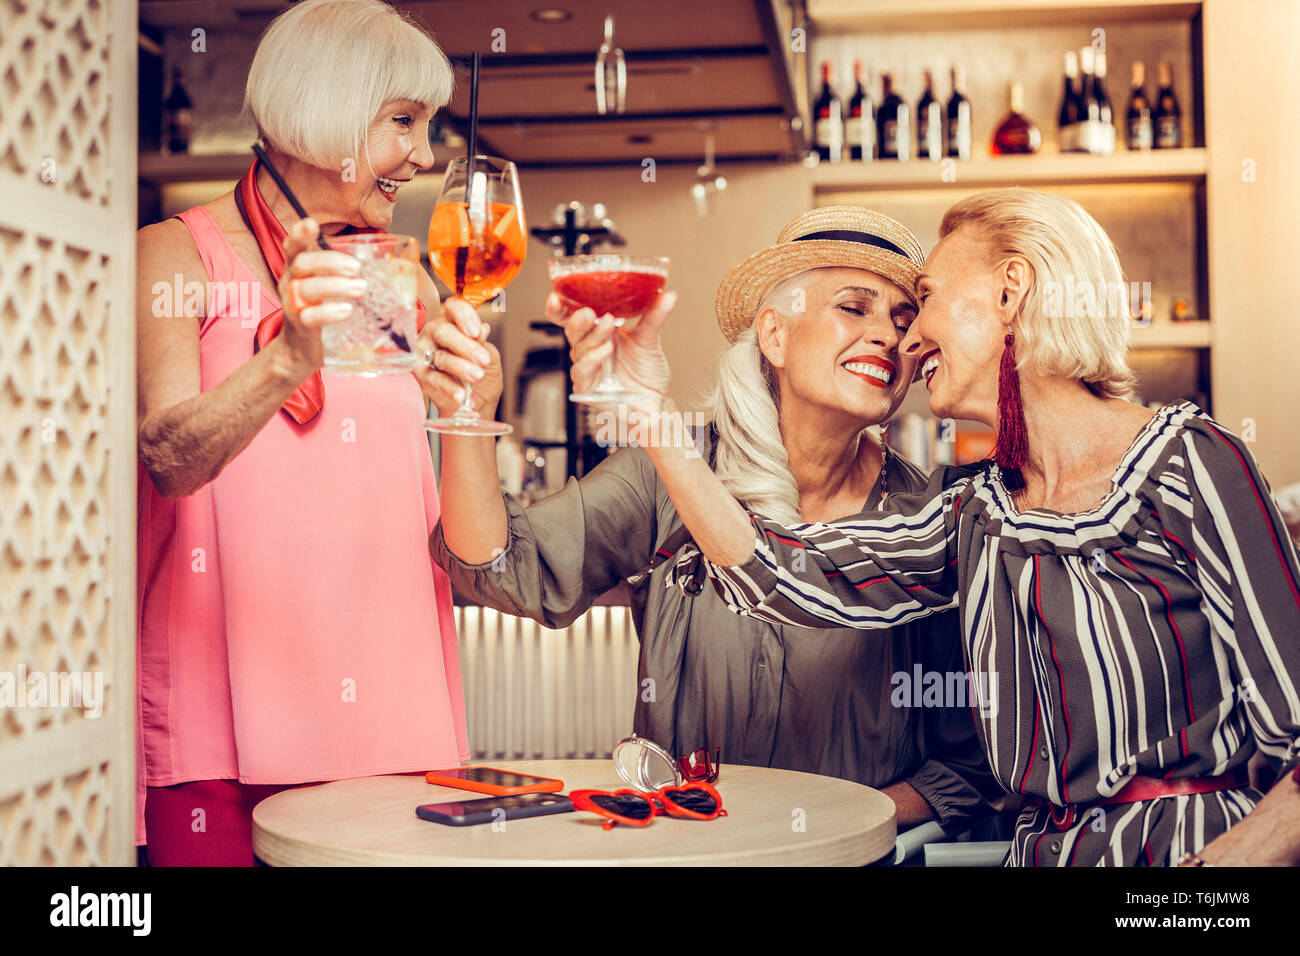 Friendly pleasant old ladies in stylish outfits drinking cocktails Stock Photo